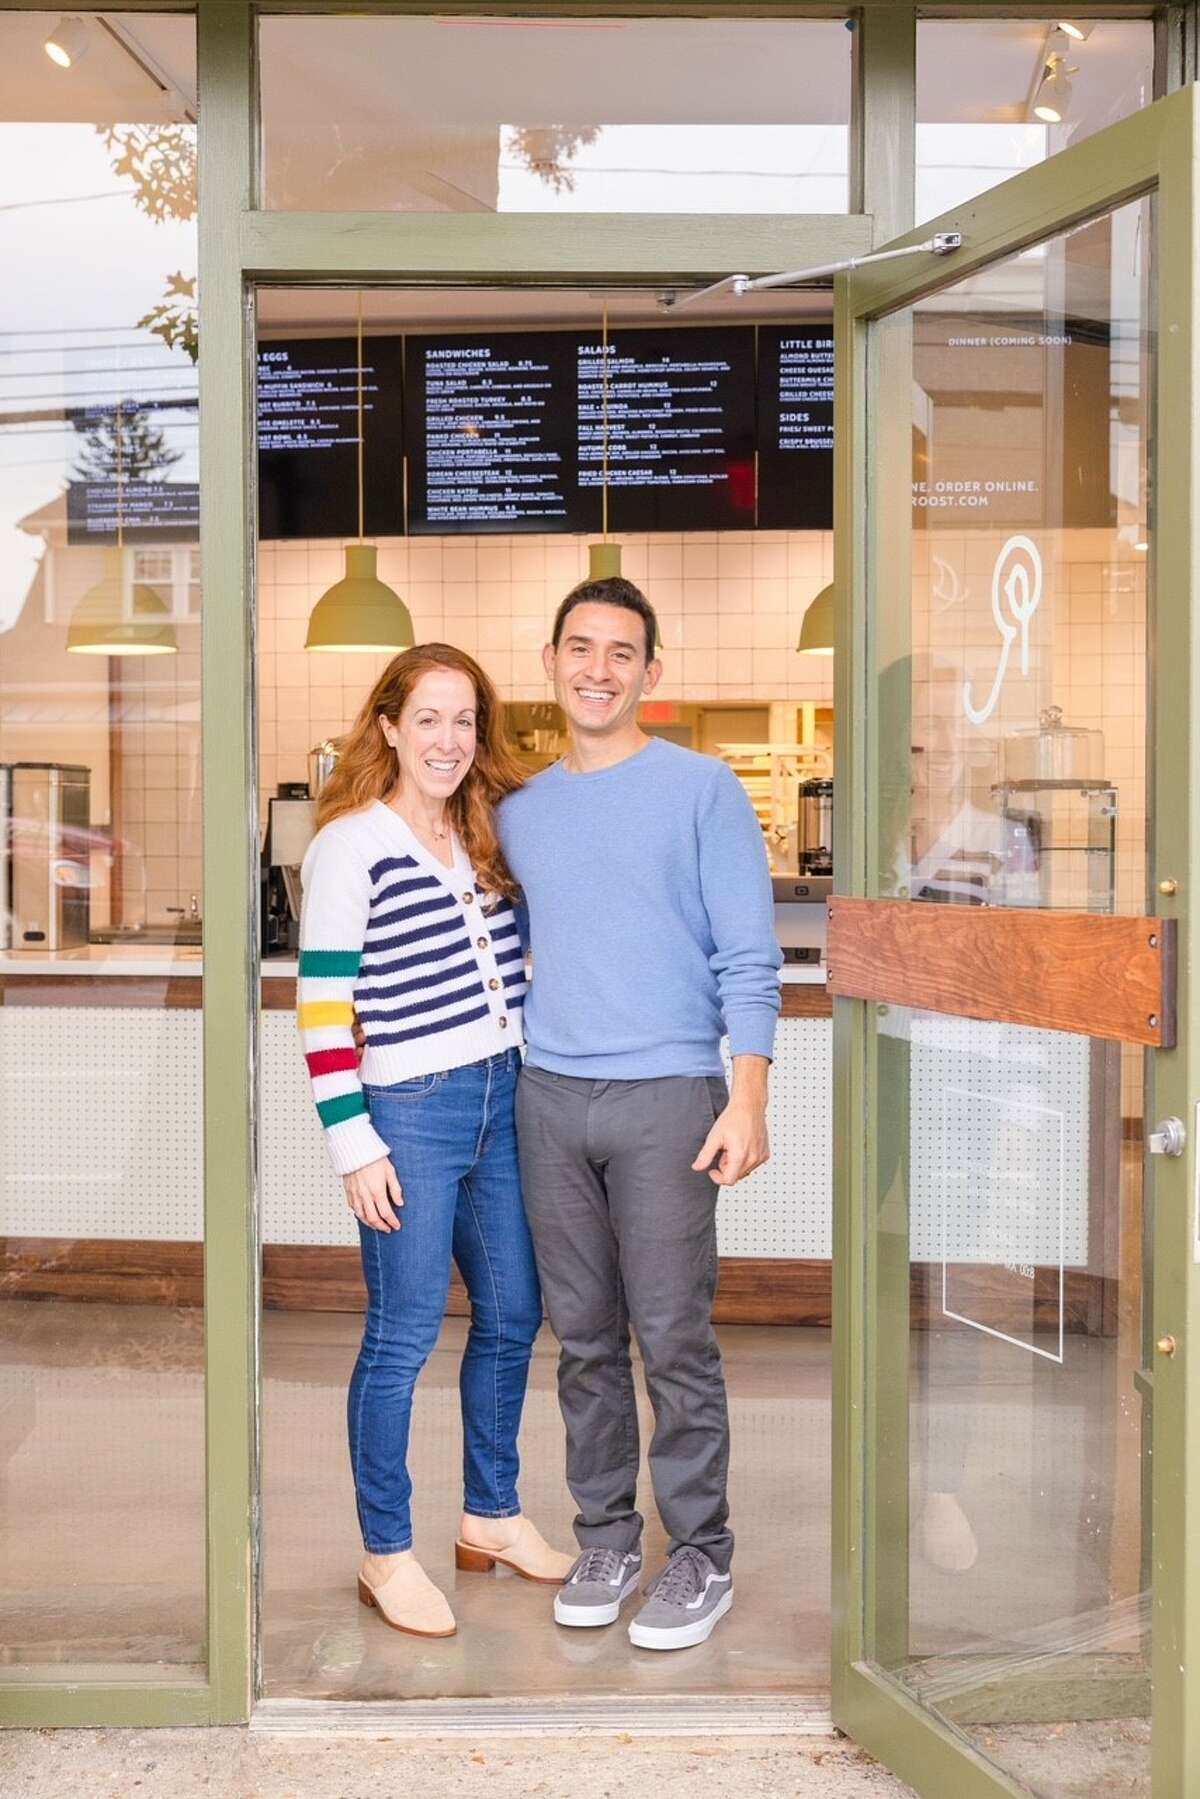 Chef and Owner, Mike Pietrafeso, with his wife Krista, in front of the new Roost Cos Cob, CT.